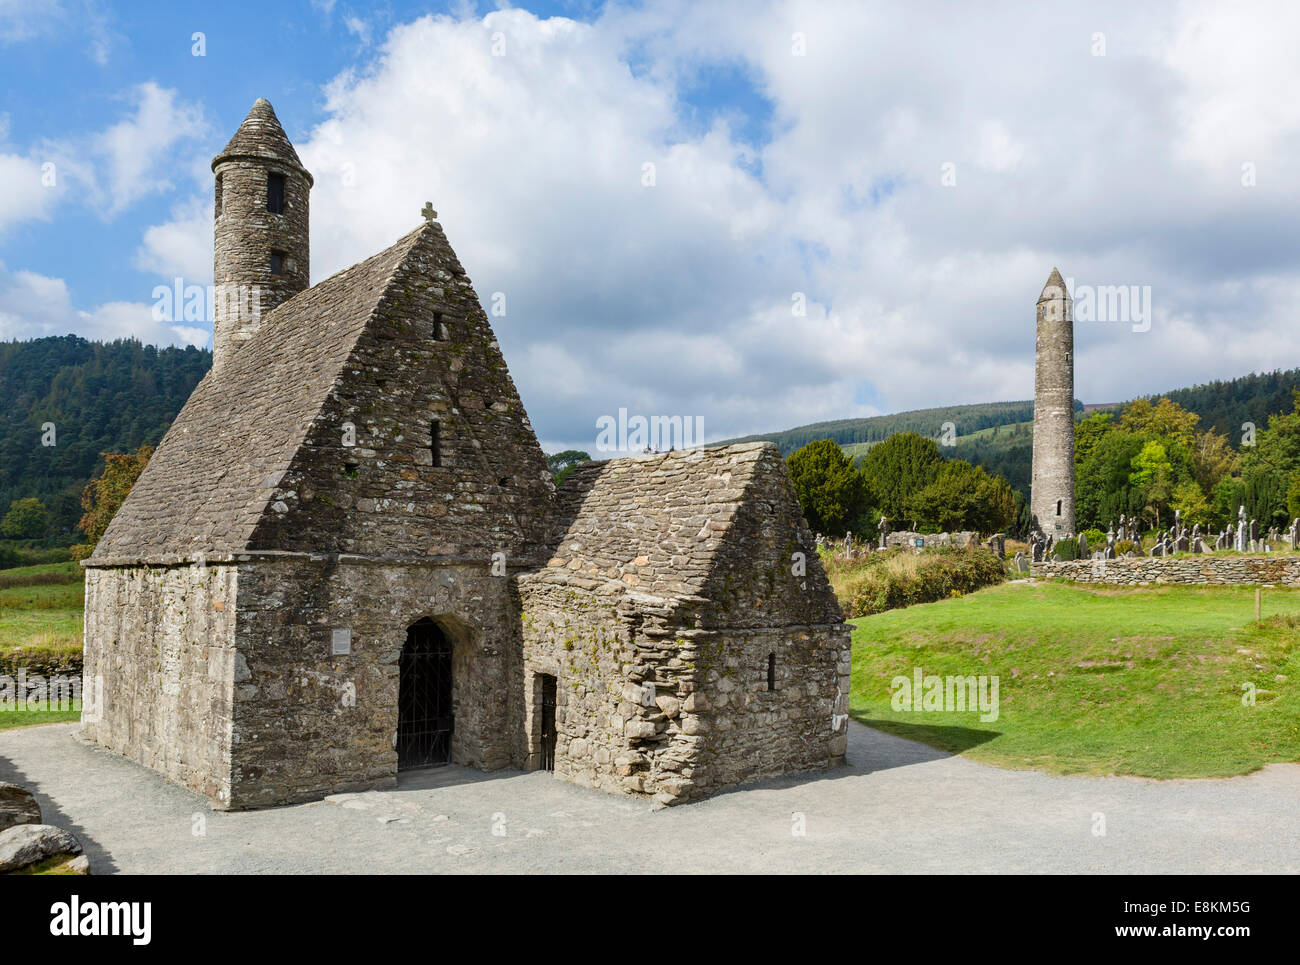 Saint Kevin's Church and the Round Tower in the old monastic settlement of Glendalough, County Wicklow, Republic of Ireland Stock Photo